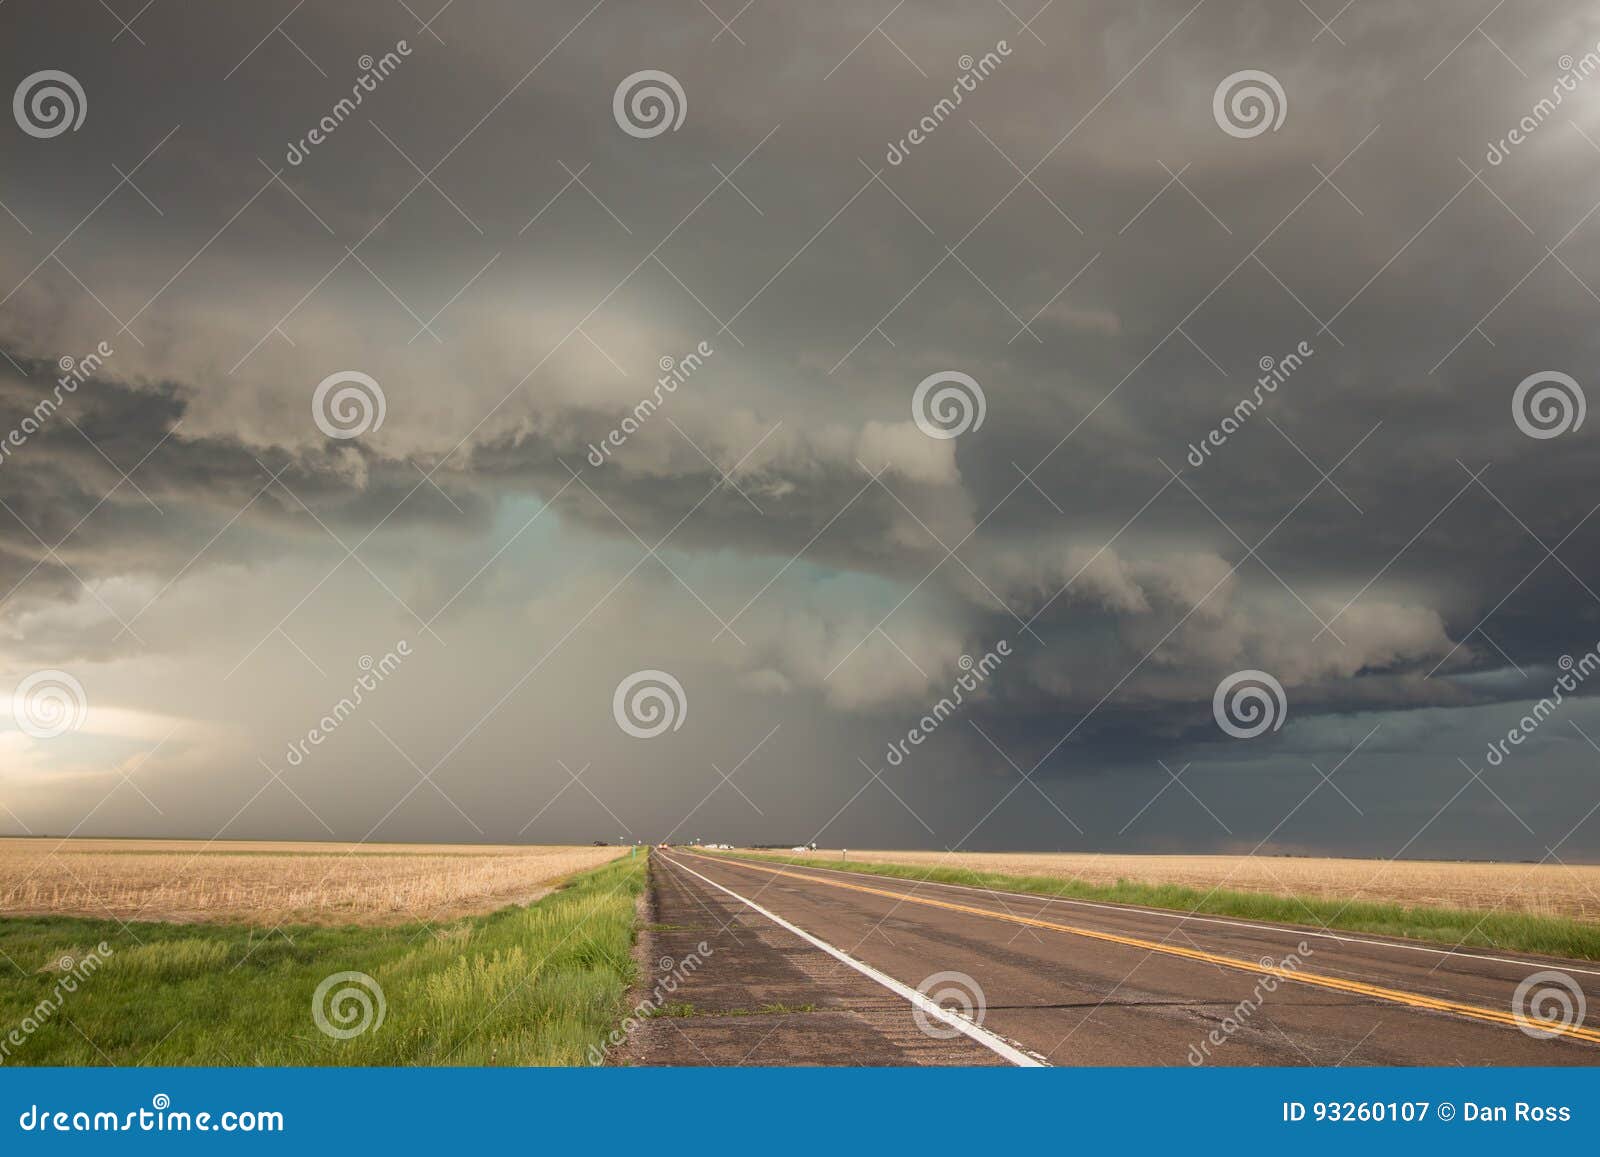 a powerful supercell thunderstorm looms over the highway.